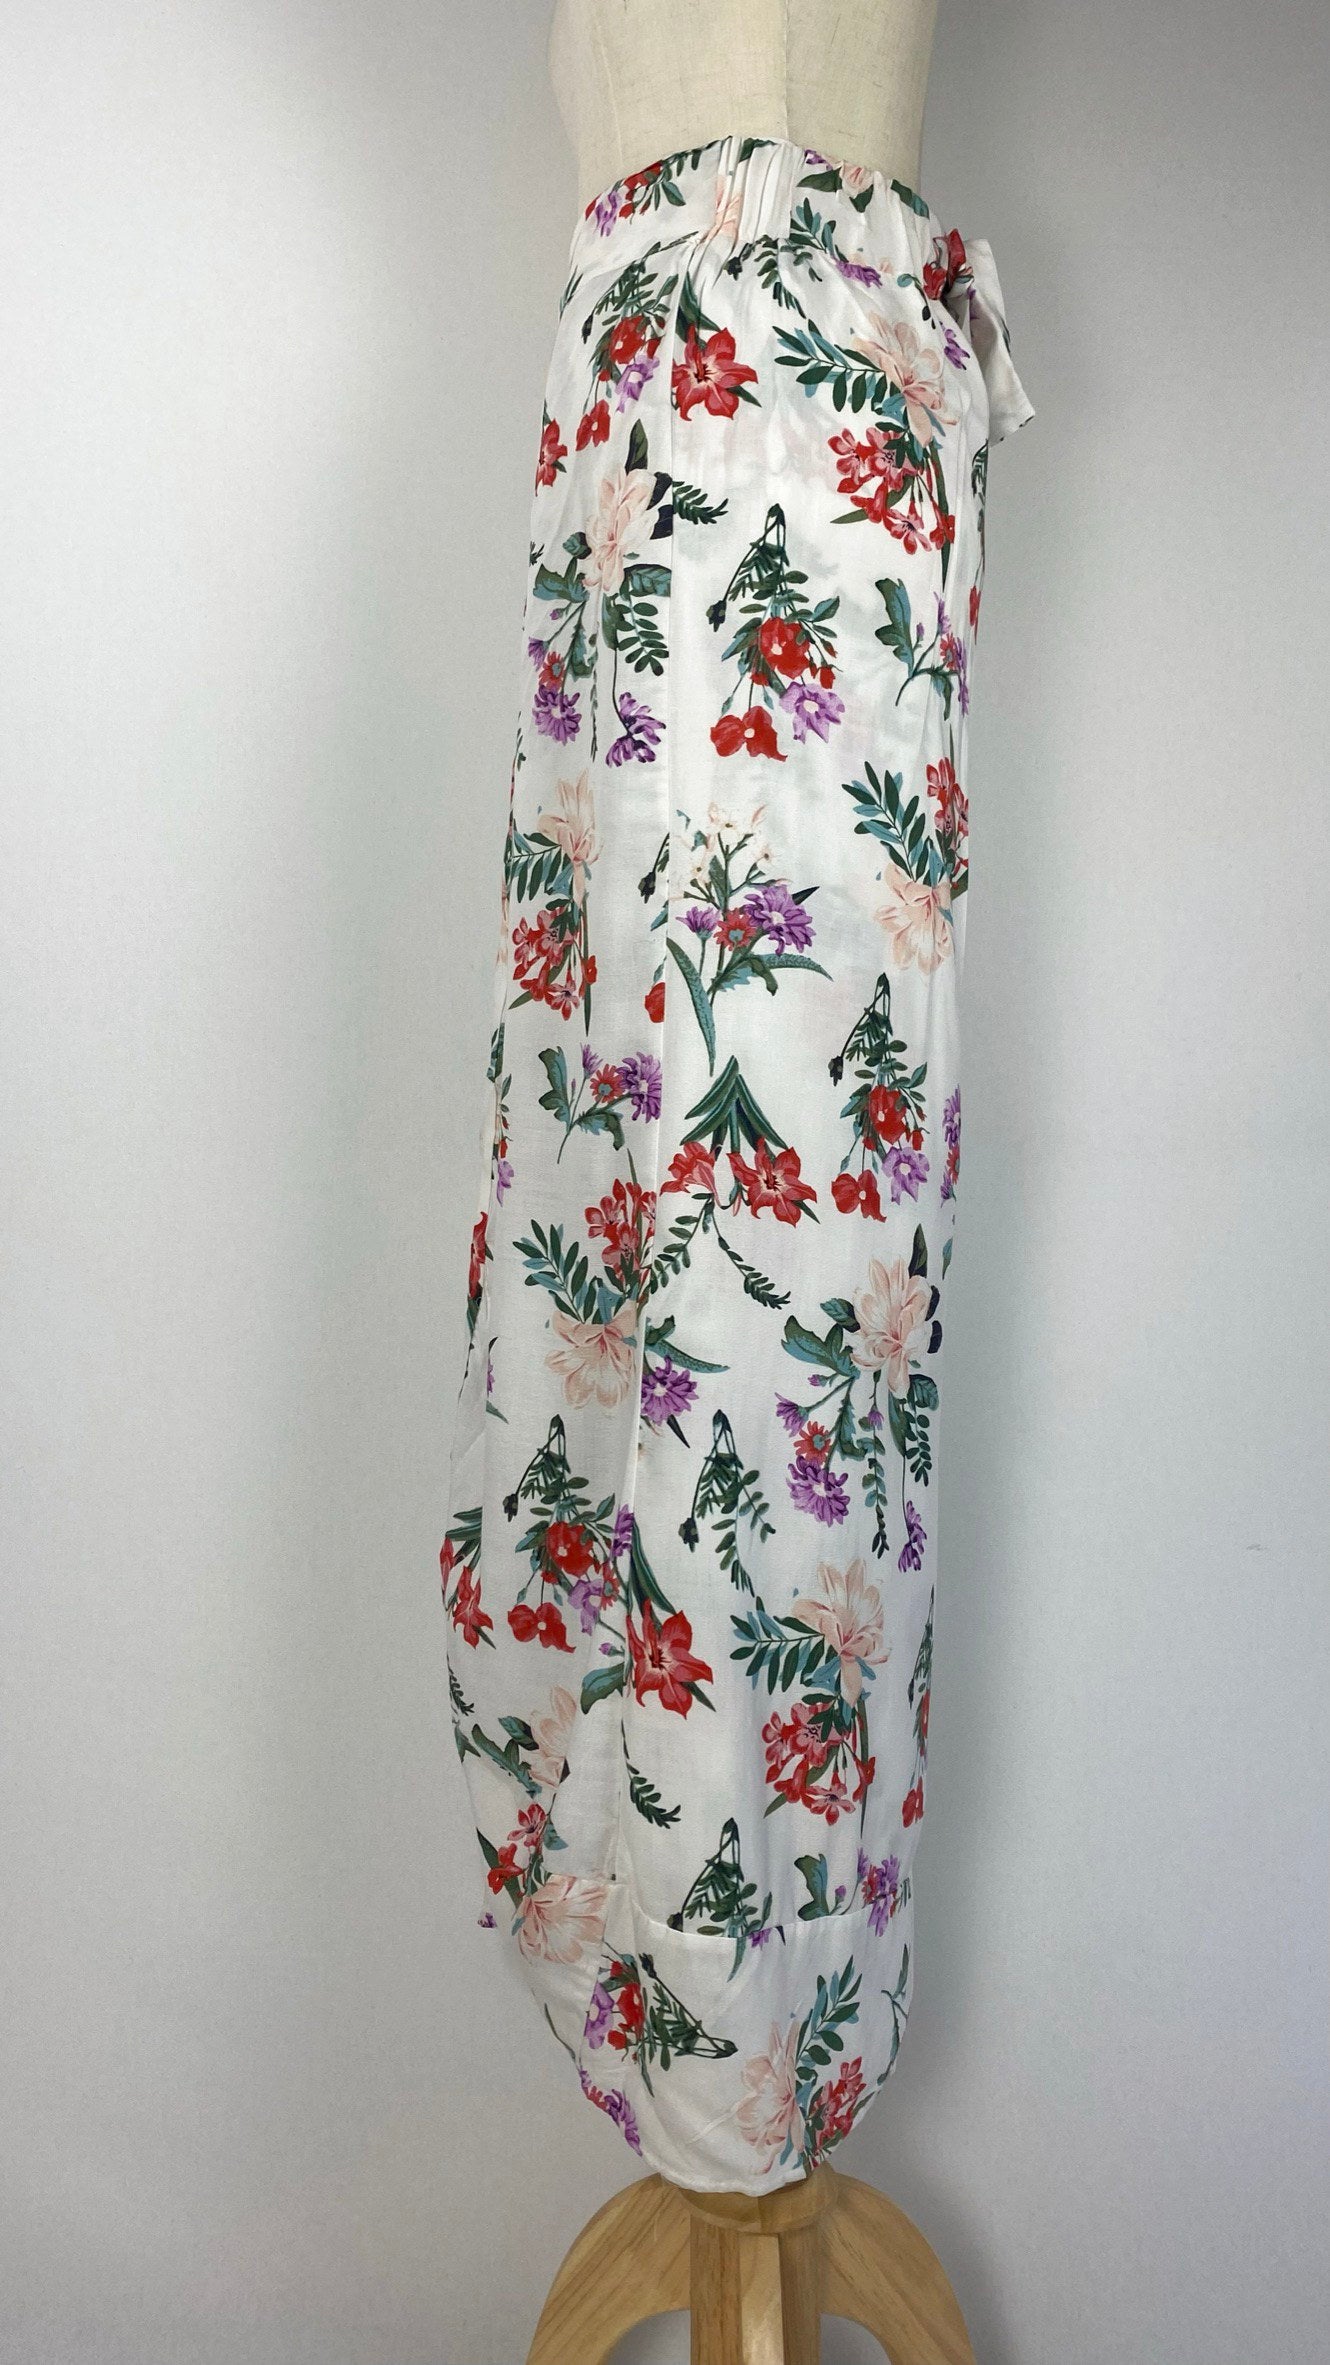 Printed Wrap Maxi Skirt with Pants, White